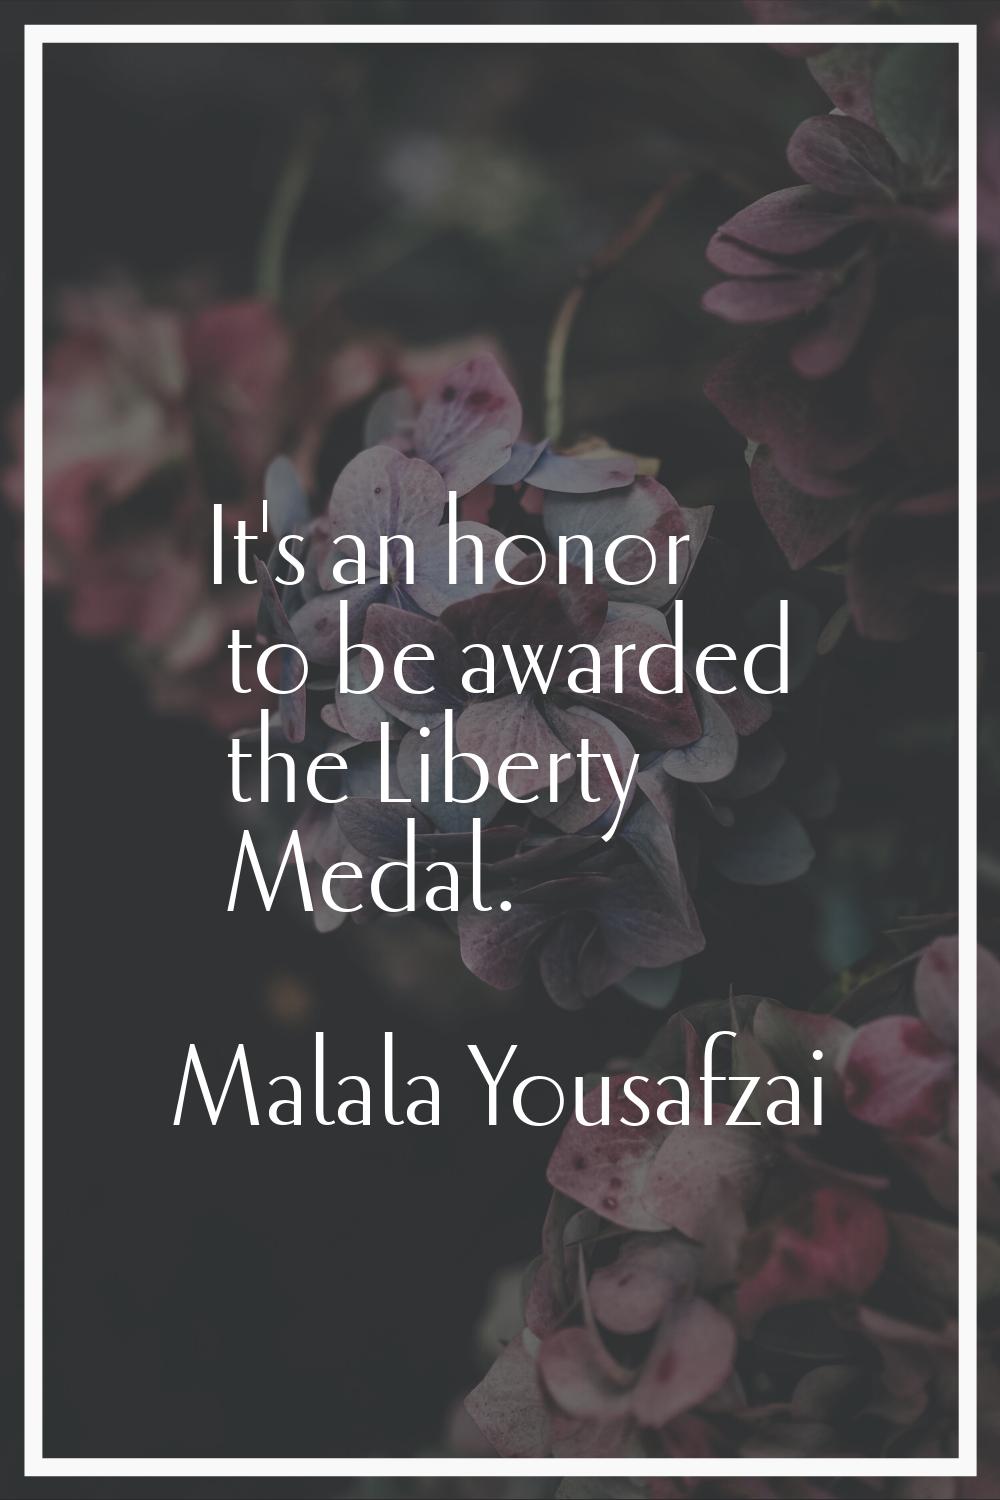 It's an honor to be awarded the Liberty Medal.